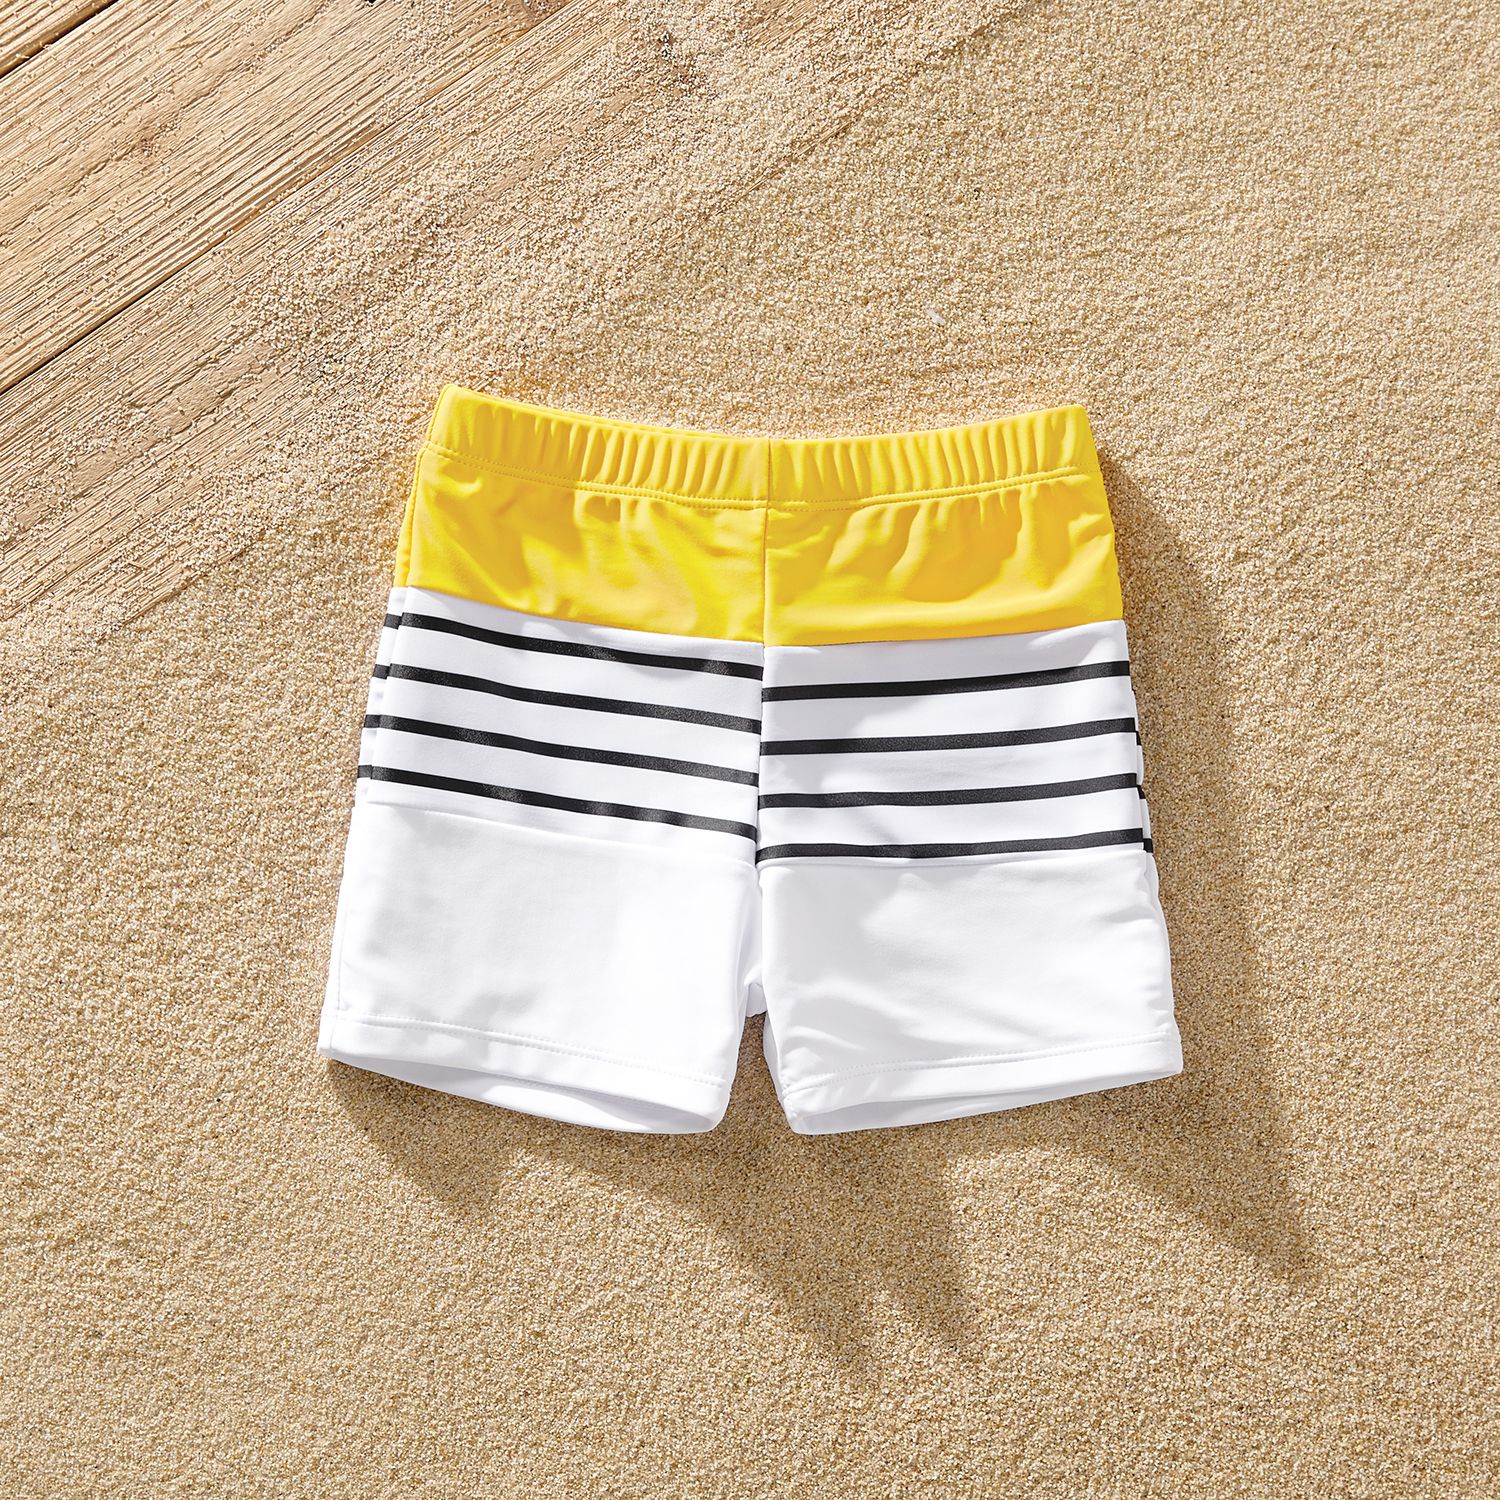 Family Matching Colorblock Spliced Cut Out One-piece Swimsuit Or Striped Swim Trunks Shorts